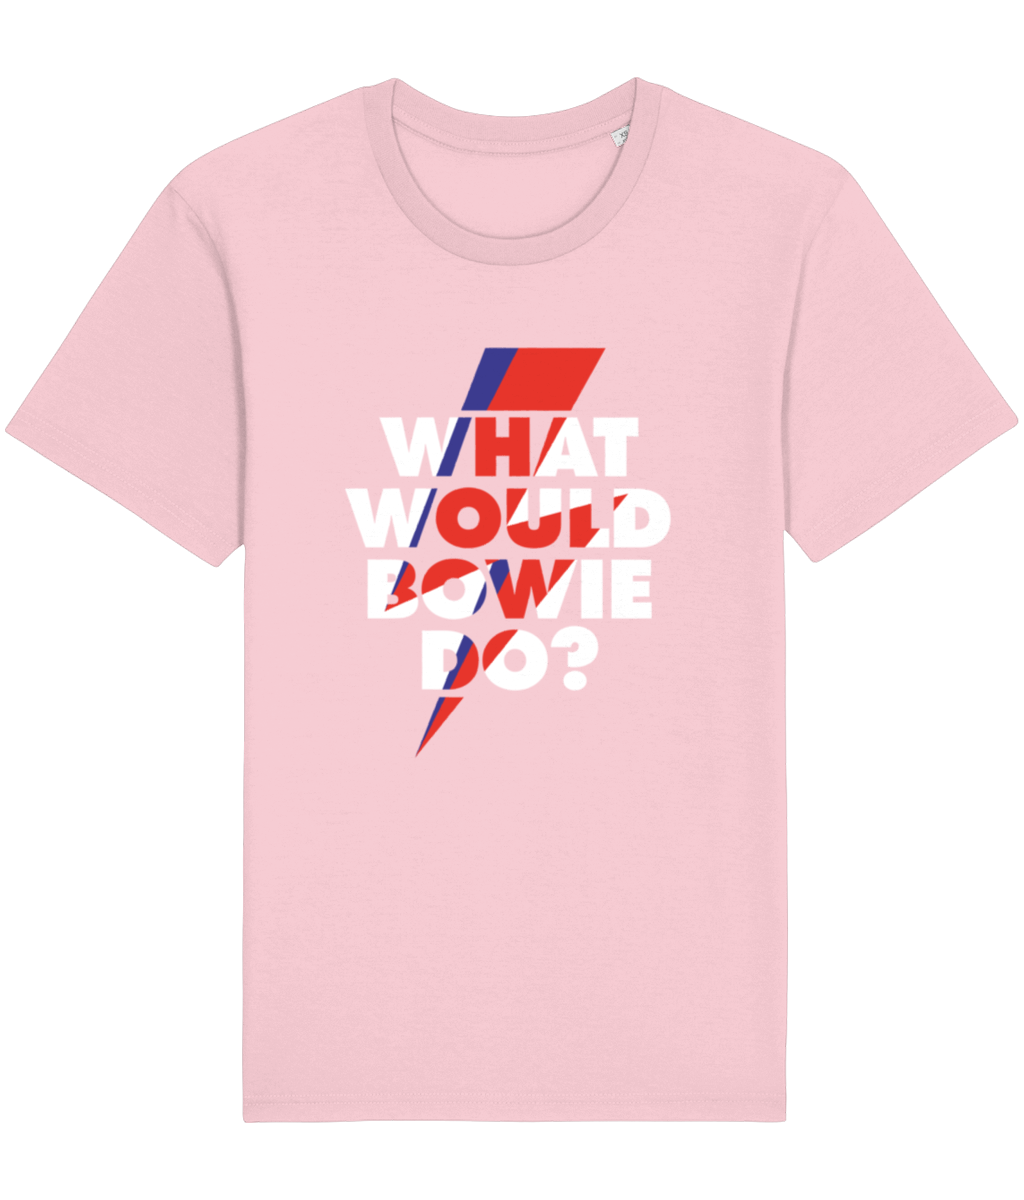 Adults Unisex Rocker Tshirt What Would Bowie Do?